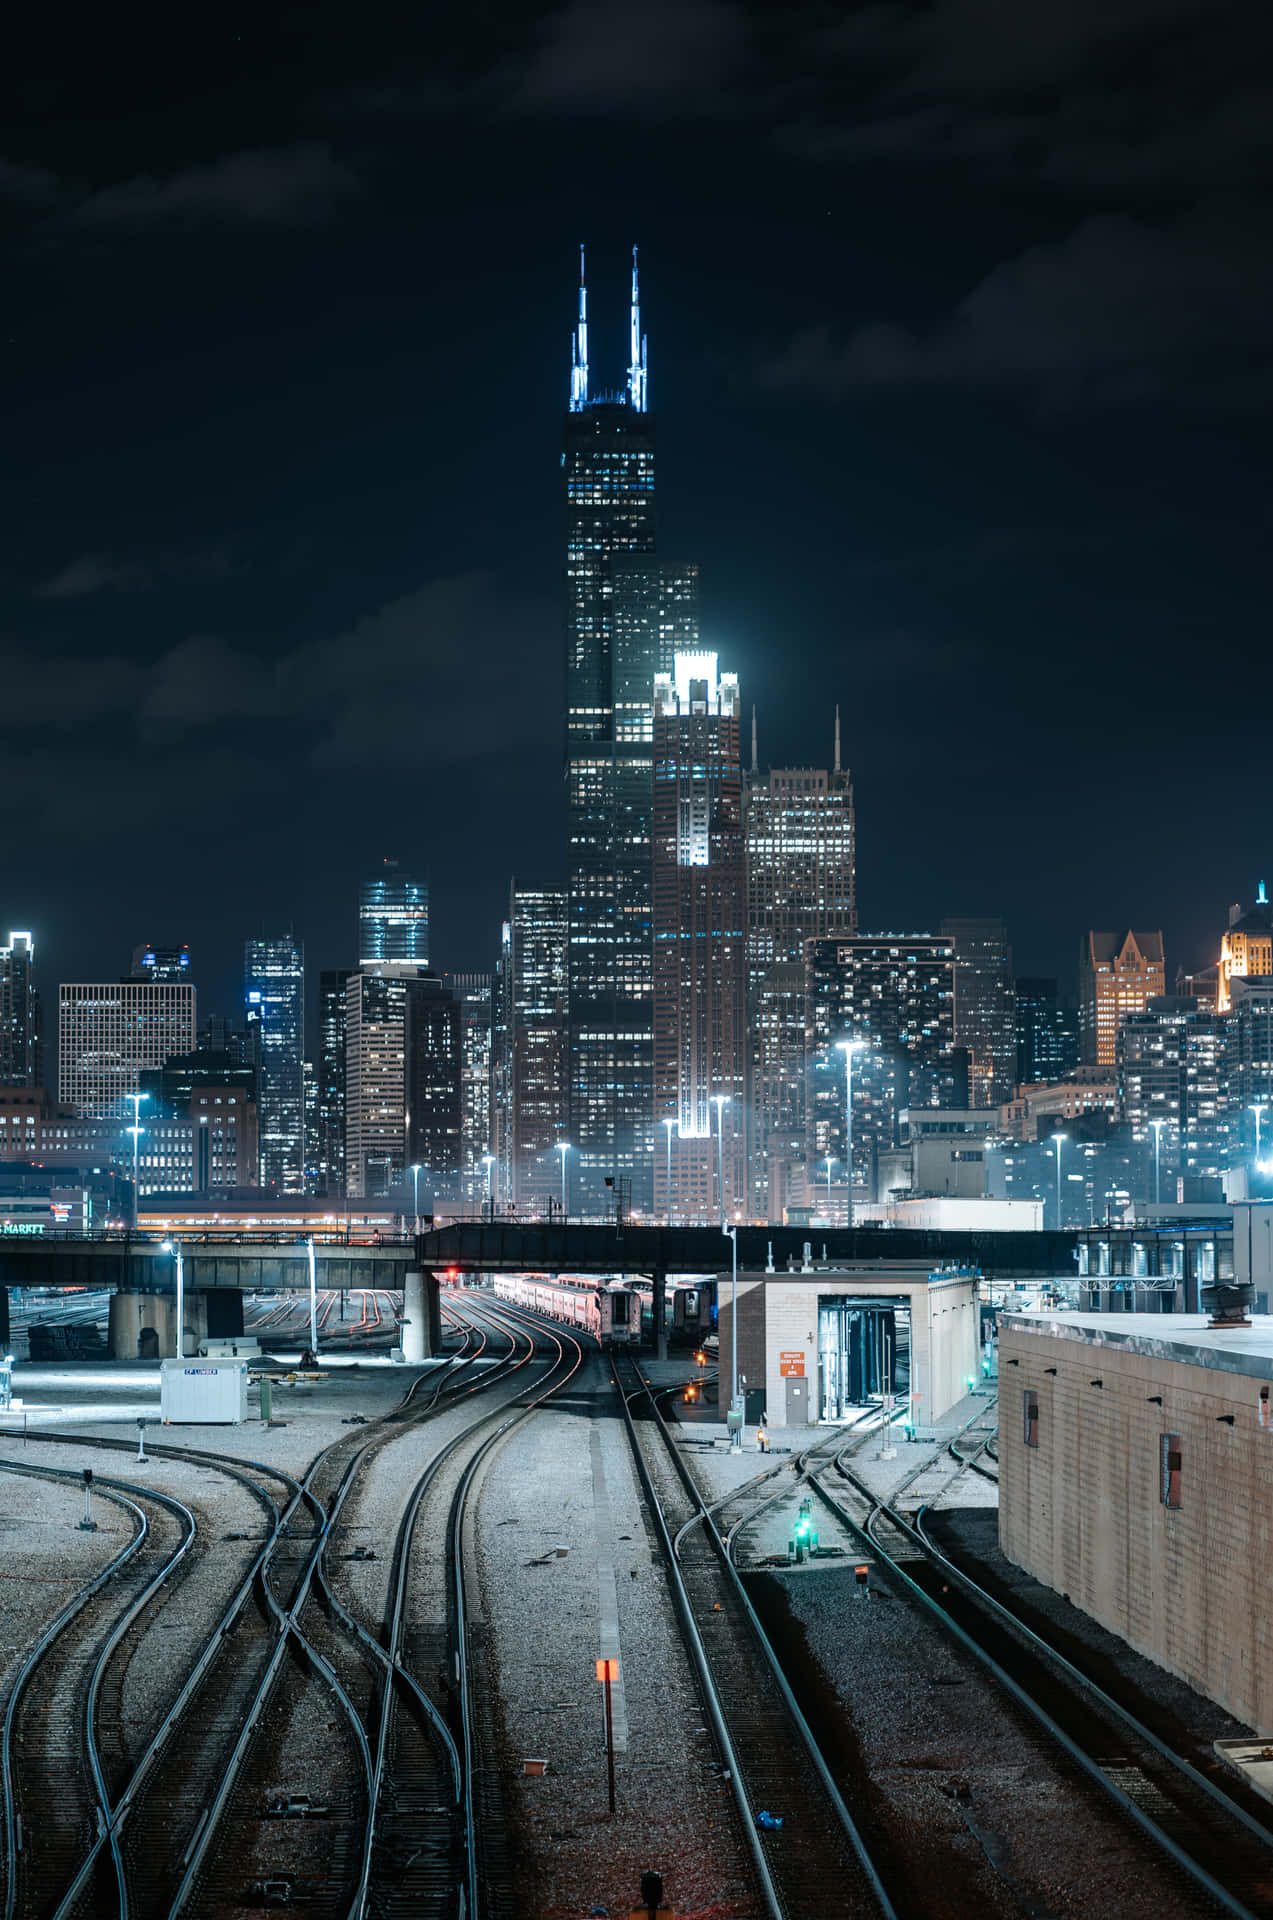 The Amazing Chicago Skyline at Night Wallpaper